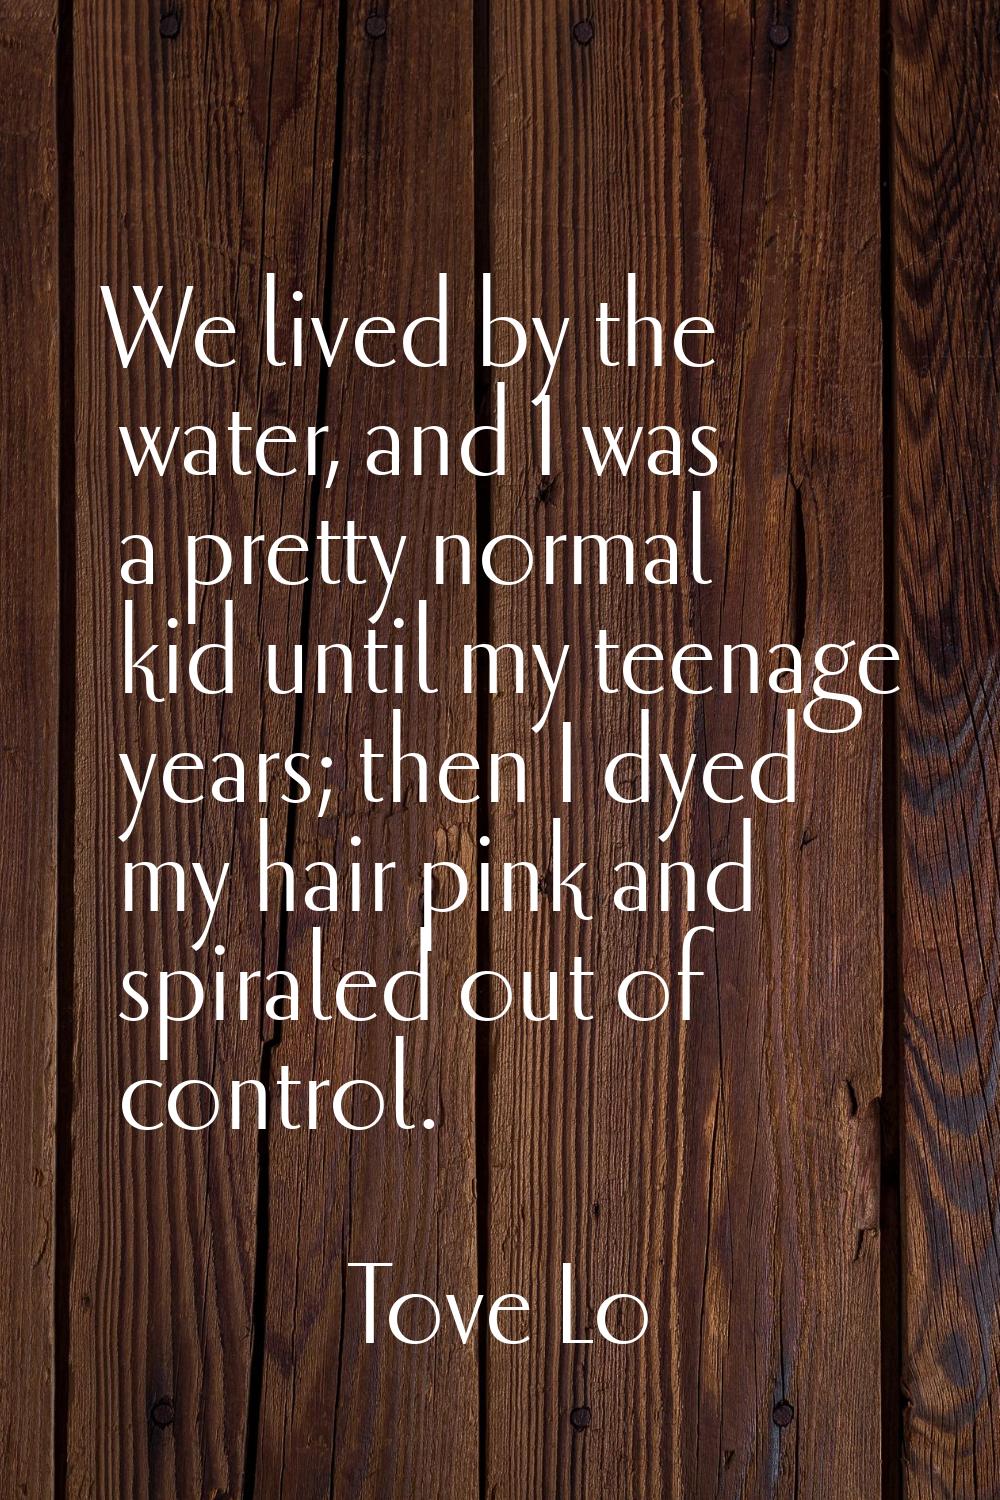 We lived by the water, and I was a pretty normal kid until my teenage years; then I dyed my hair pi